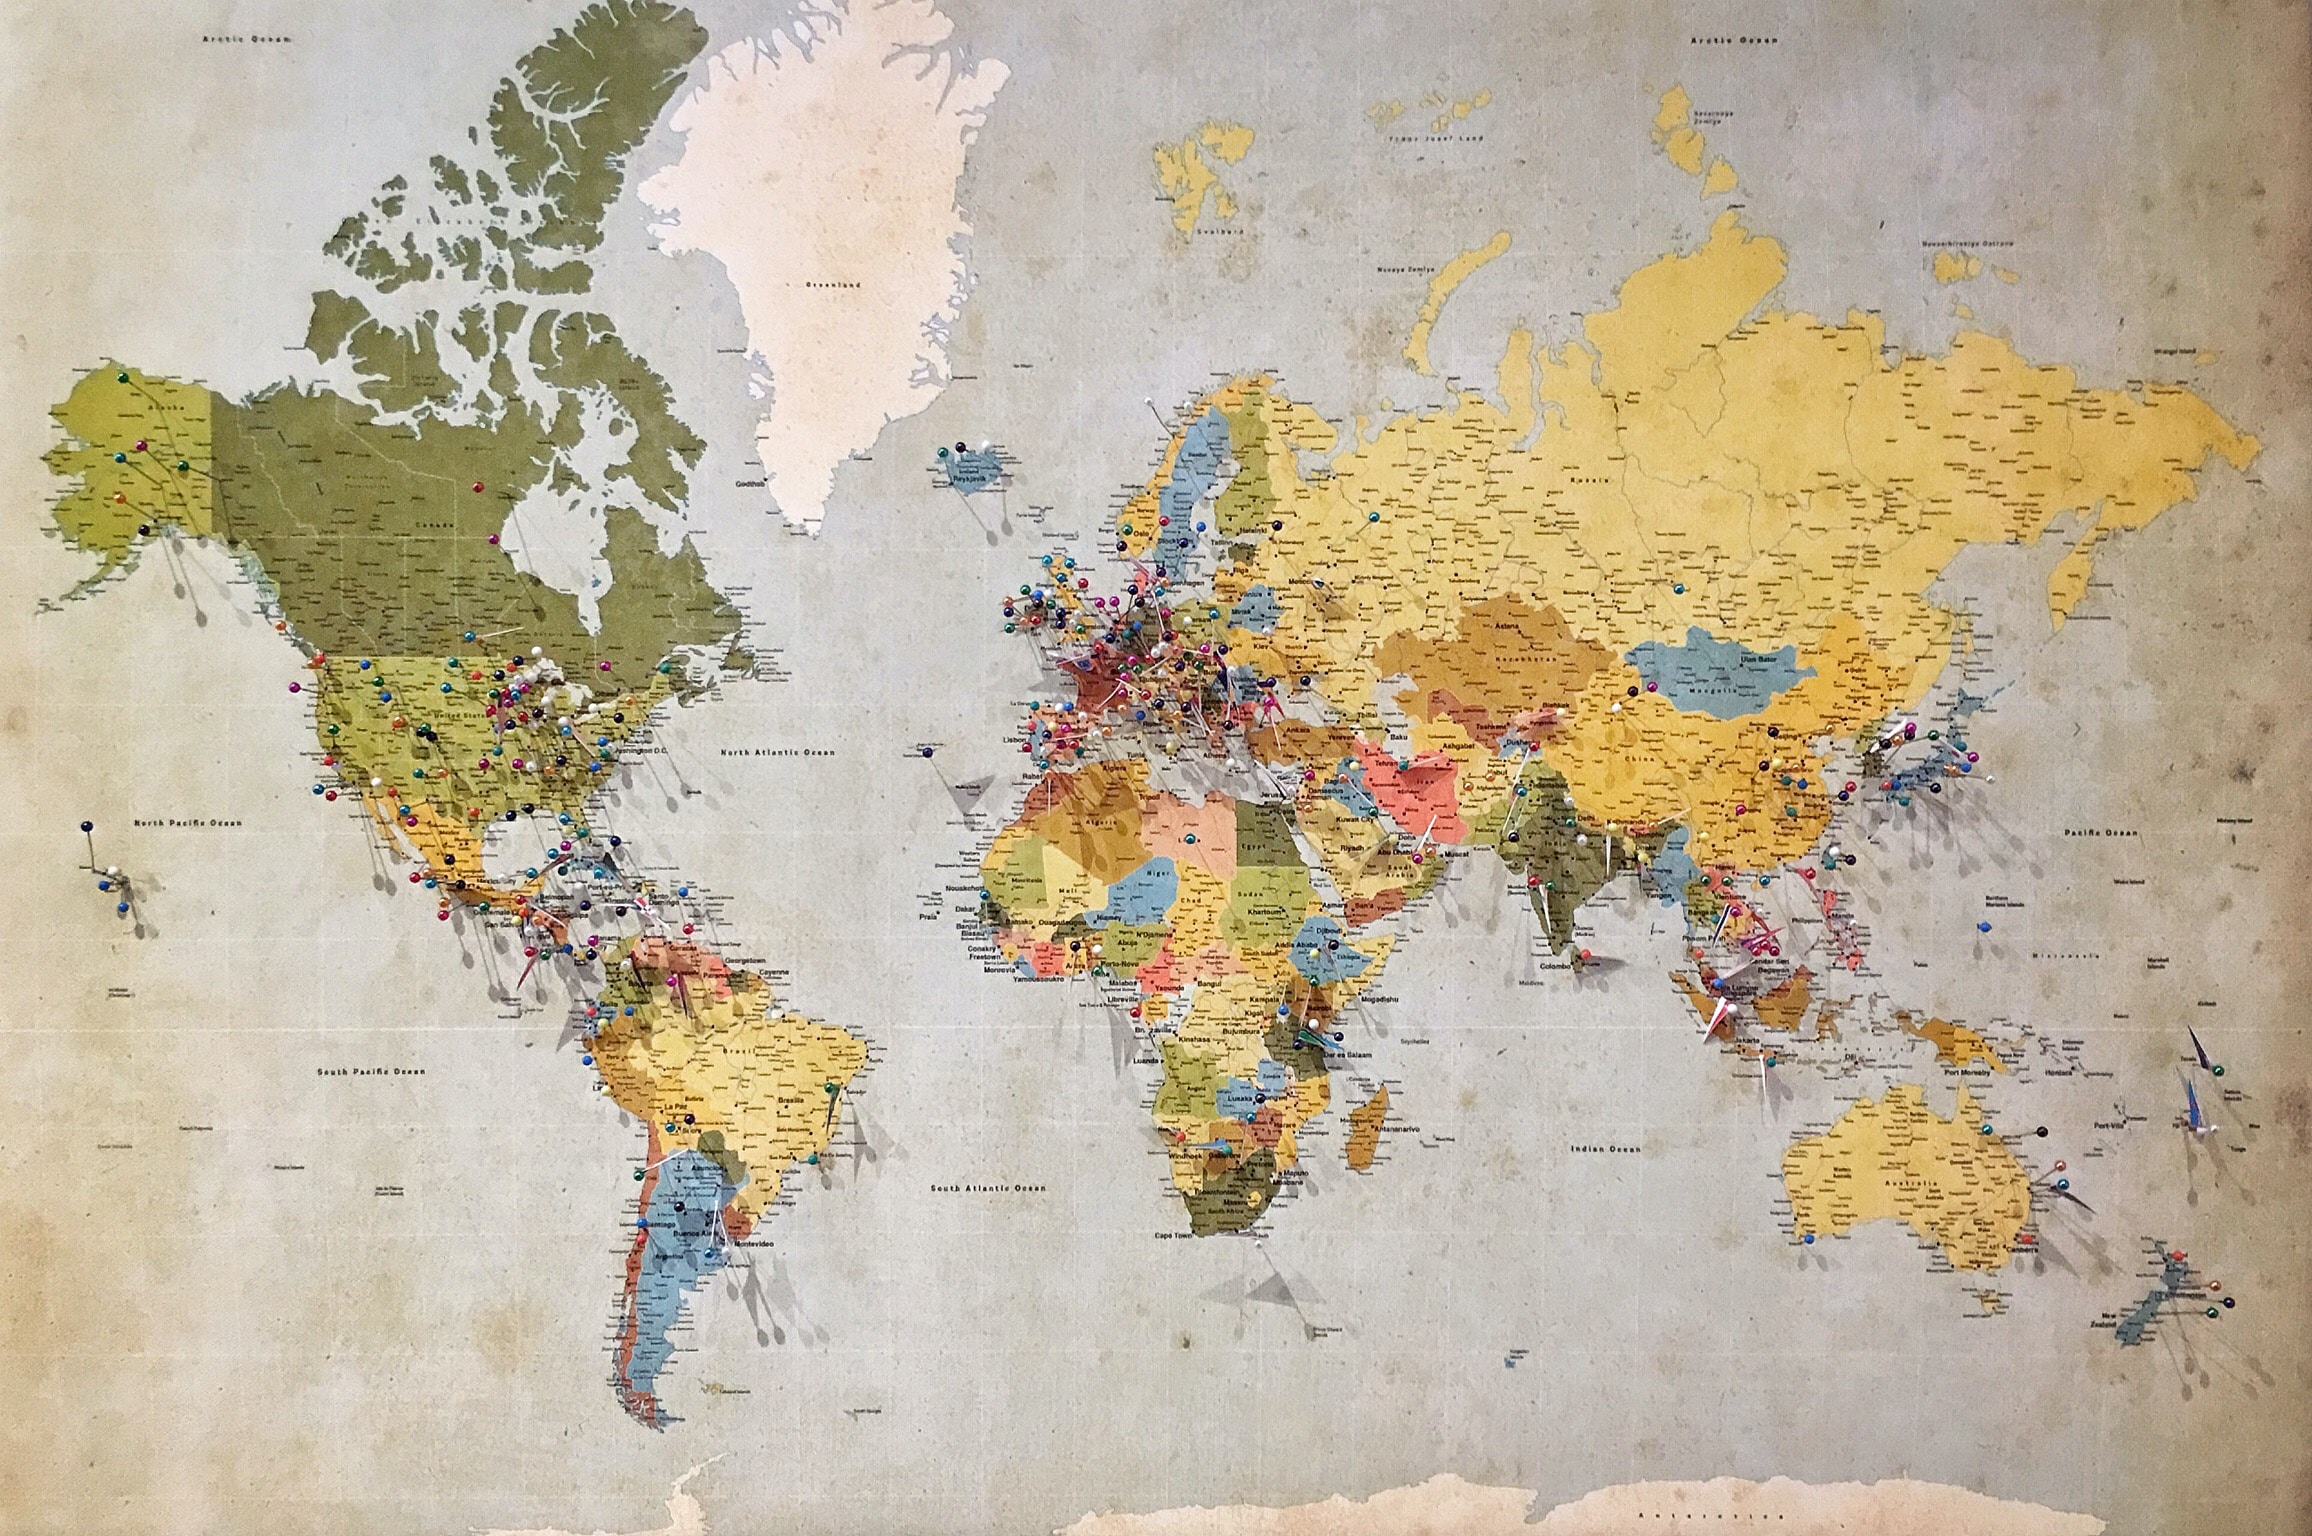 Mapping the World: Exploring the Fundamentals of Cartography